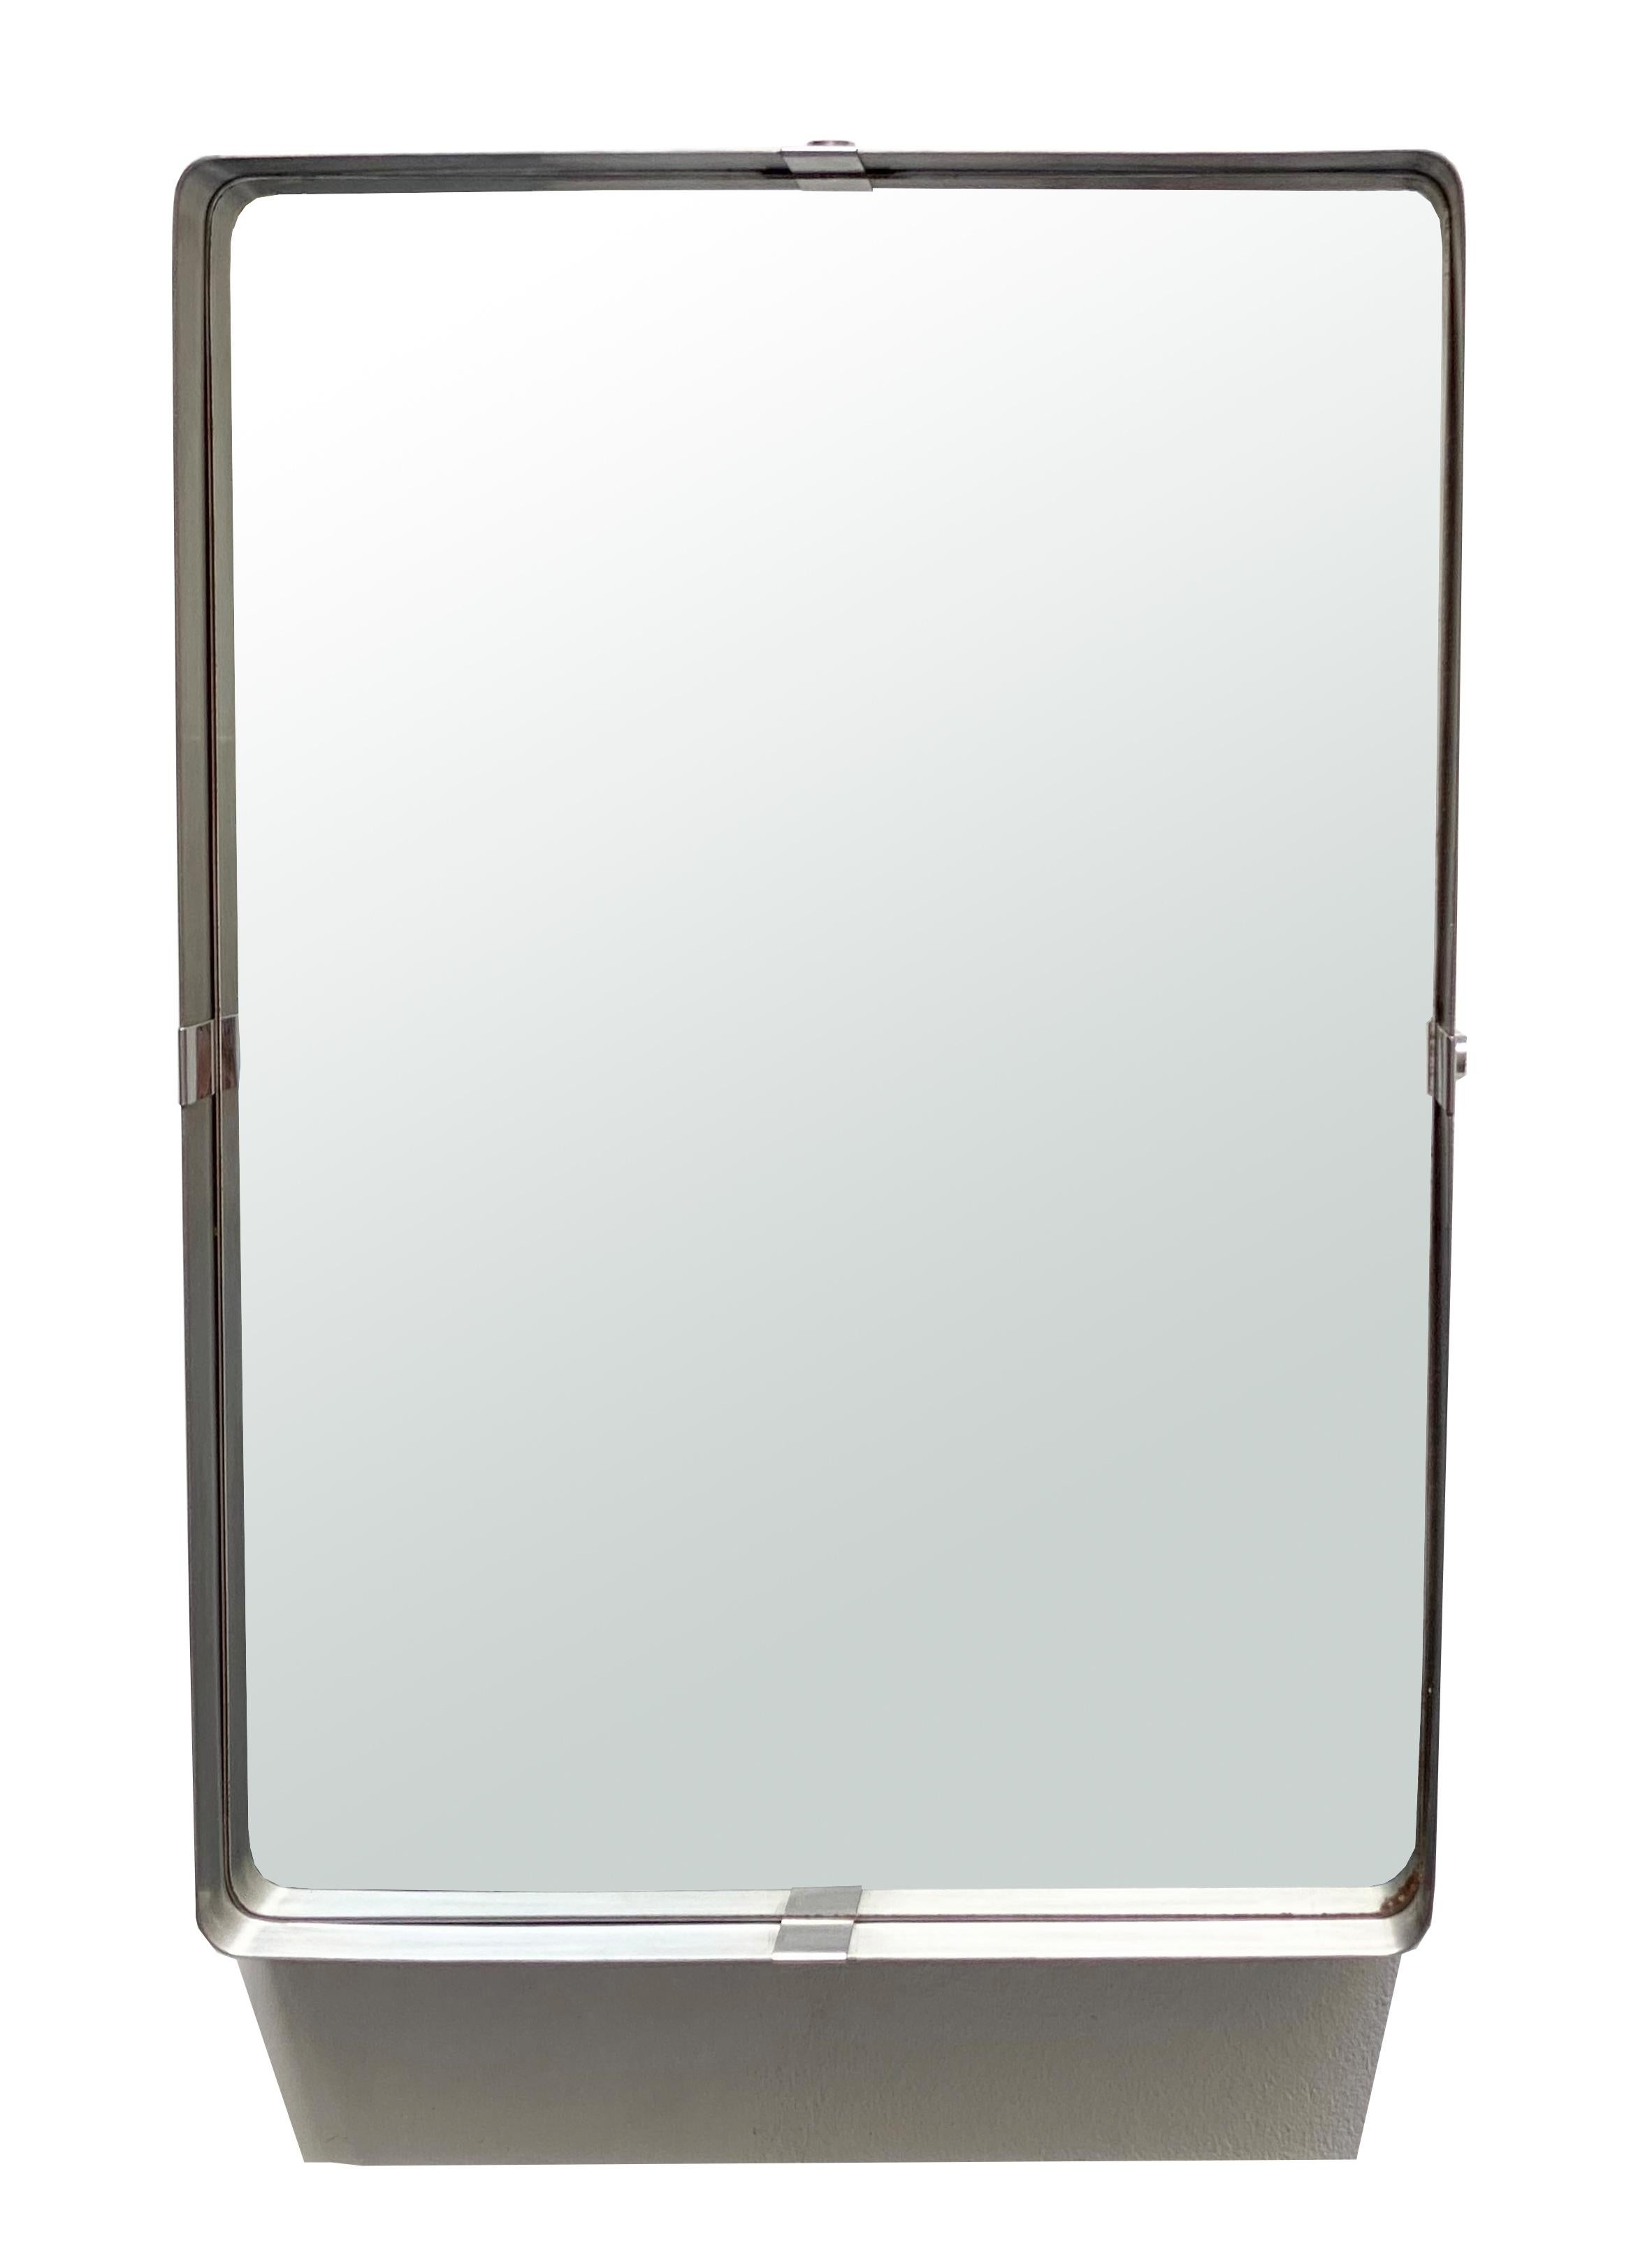 Minimal wall mirror in brushed steel, in the style of Francoise Monnet from 1970. Excellent period condition, patina consistent with use and age.